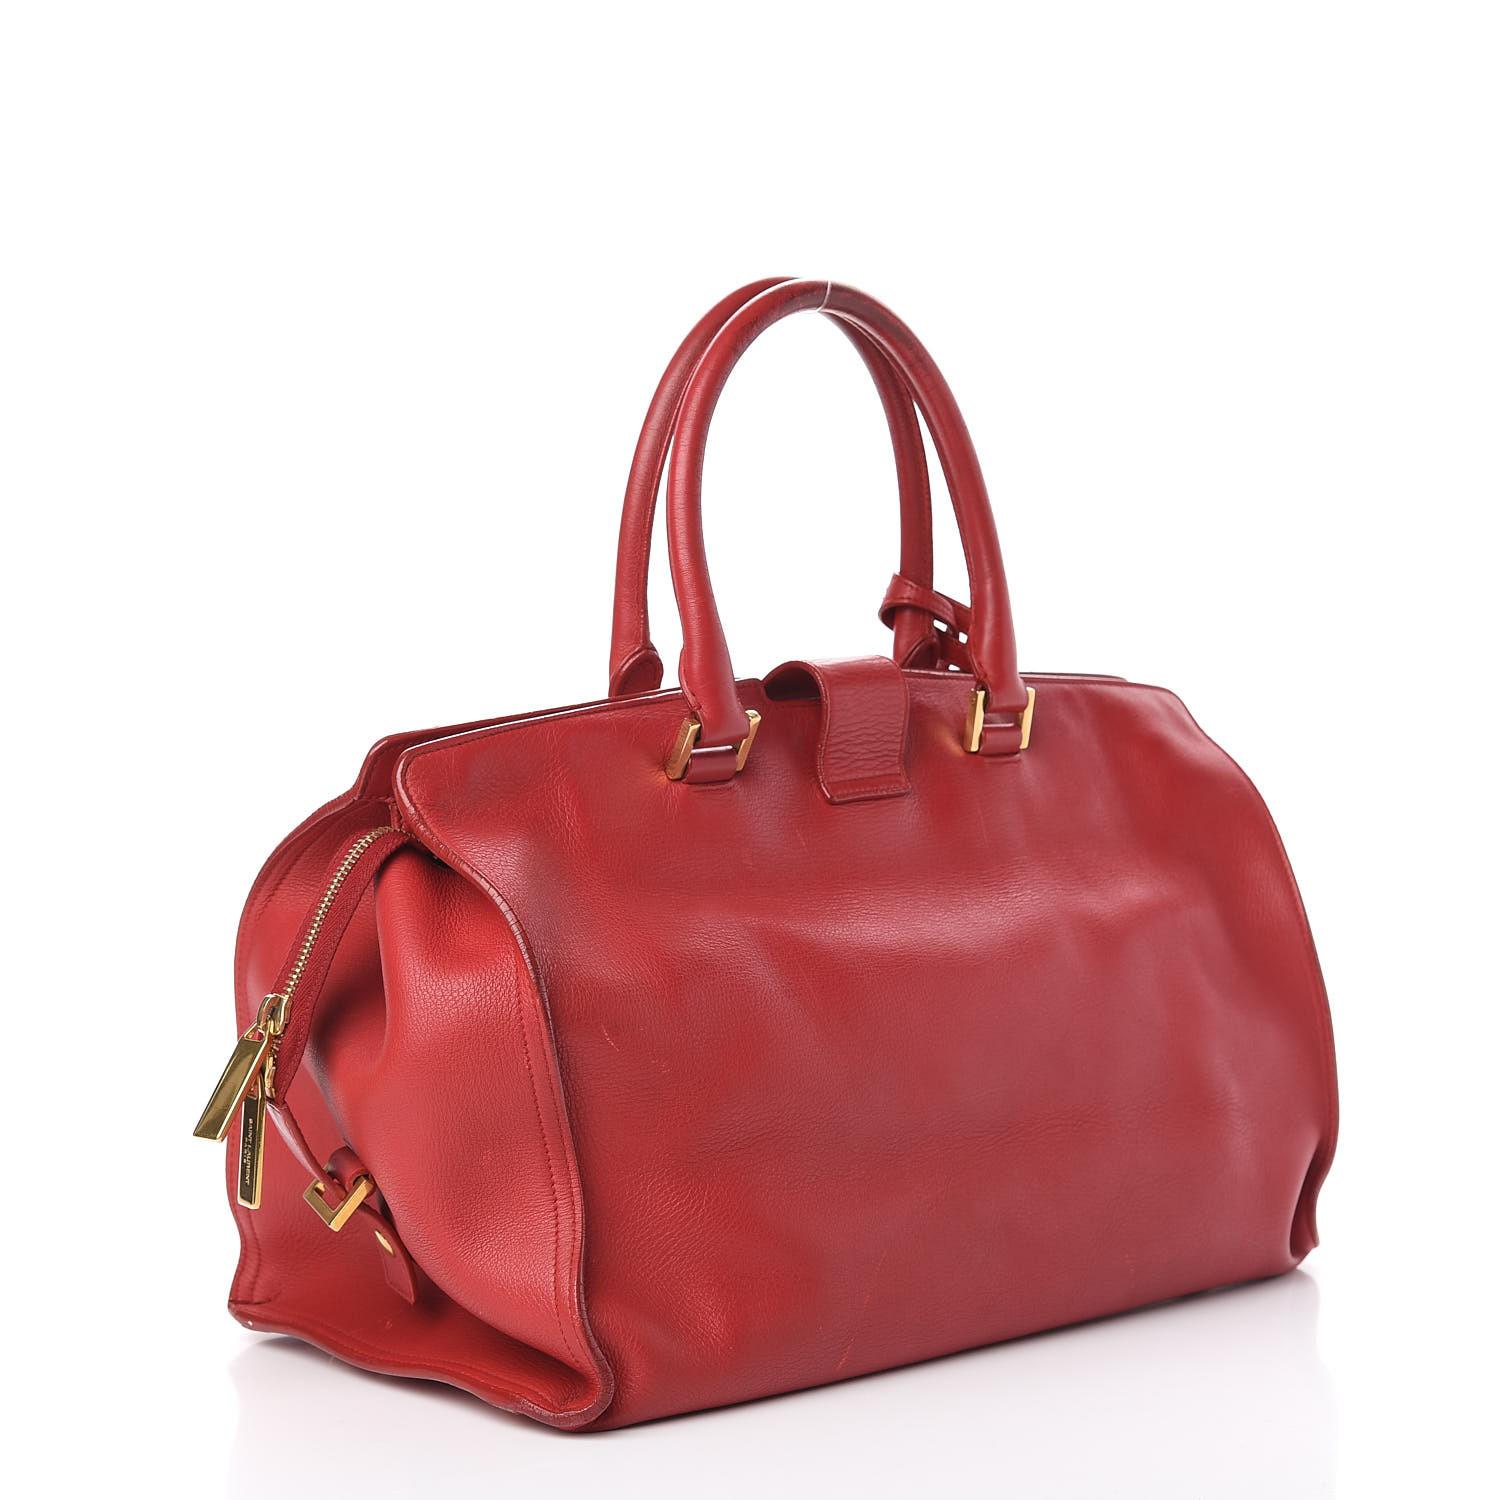 Color:  Red
Material: Leather
Model No.: 311208
Measures: Height 10” x Length 14.25” x Depth 6.5”
Drop: 5.5” (top handle) & 18” (strap)
Condition: Good. Light scratches and marks throughout.

Made in Italy